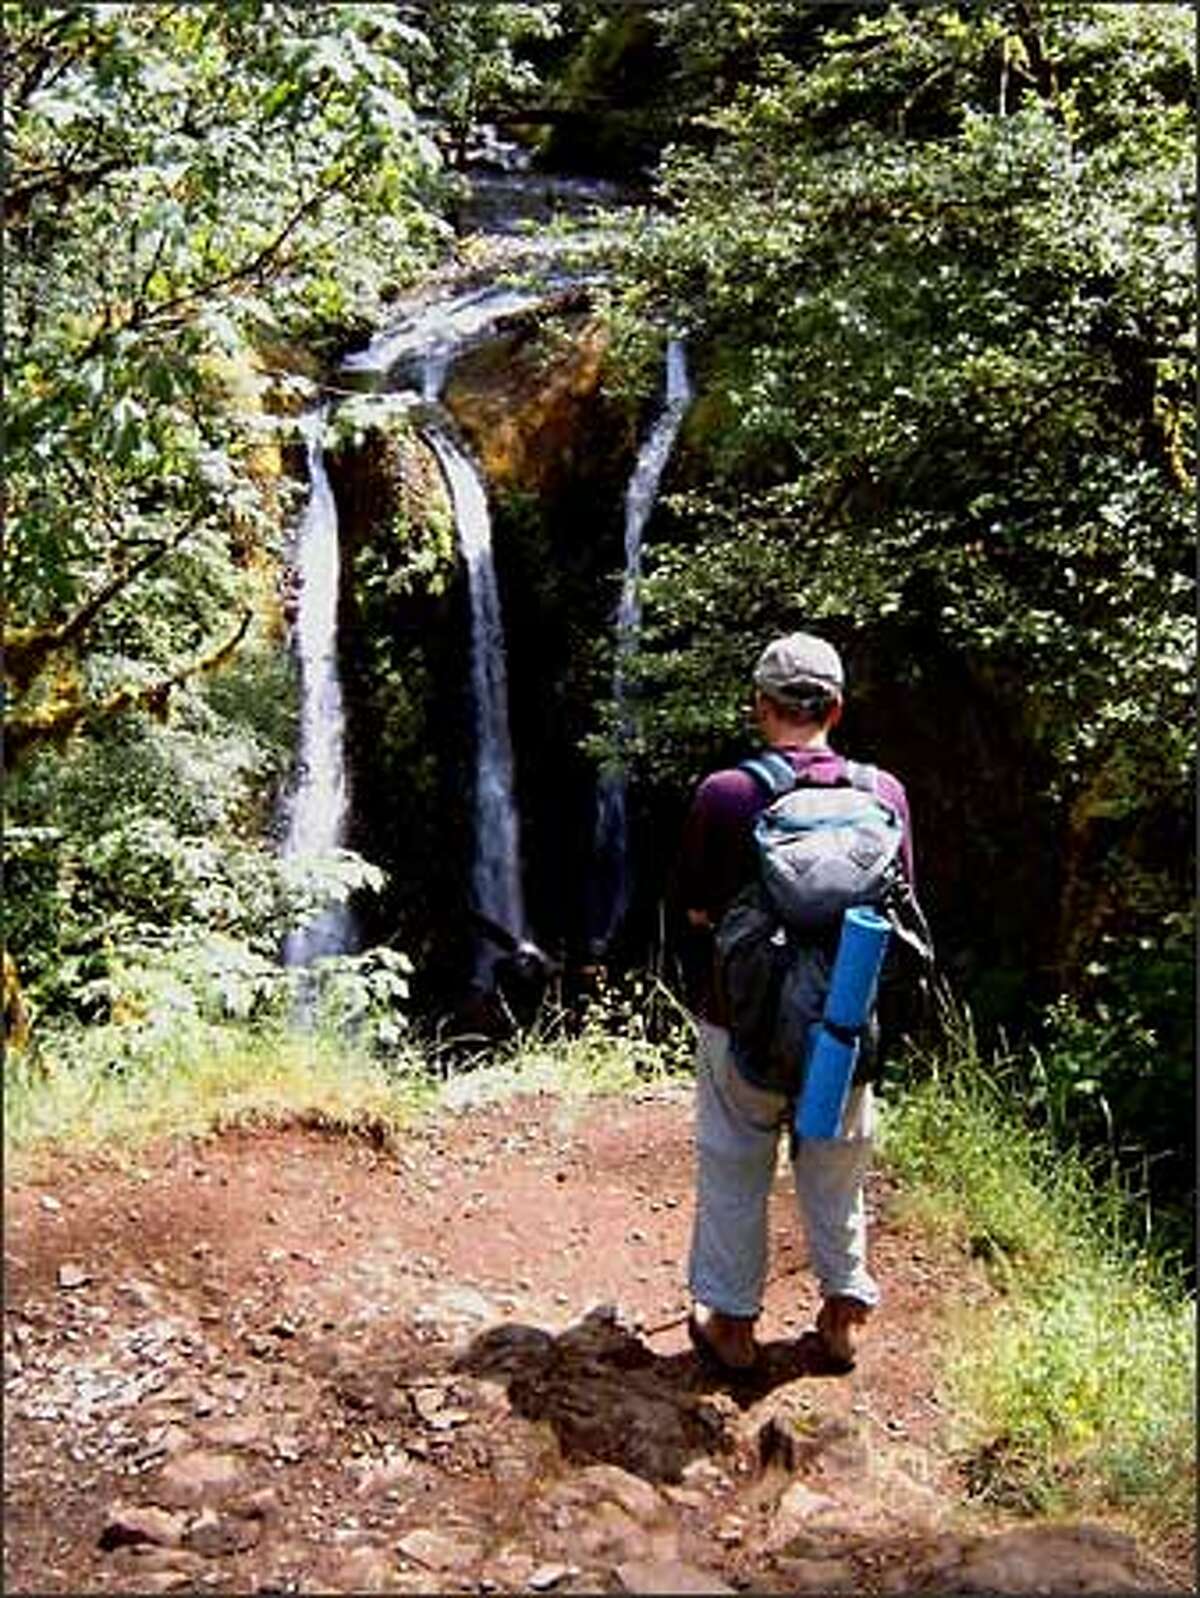 For hikers who have the time and energy, turning left at the Oneonta Trail junction and climbing an easy mile yields a knockout view of Triple Falls.